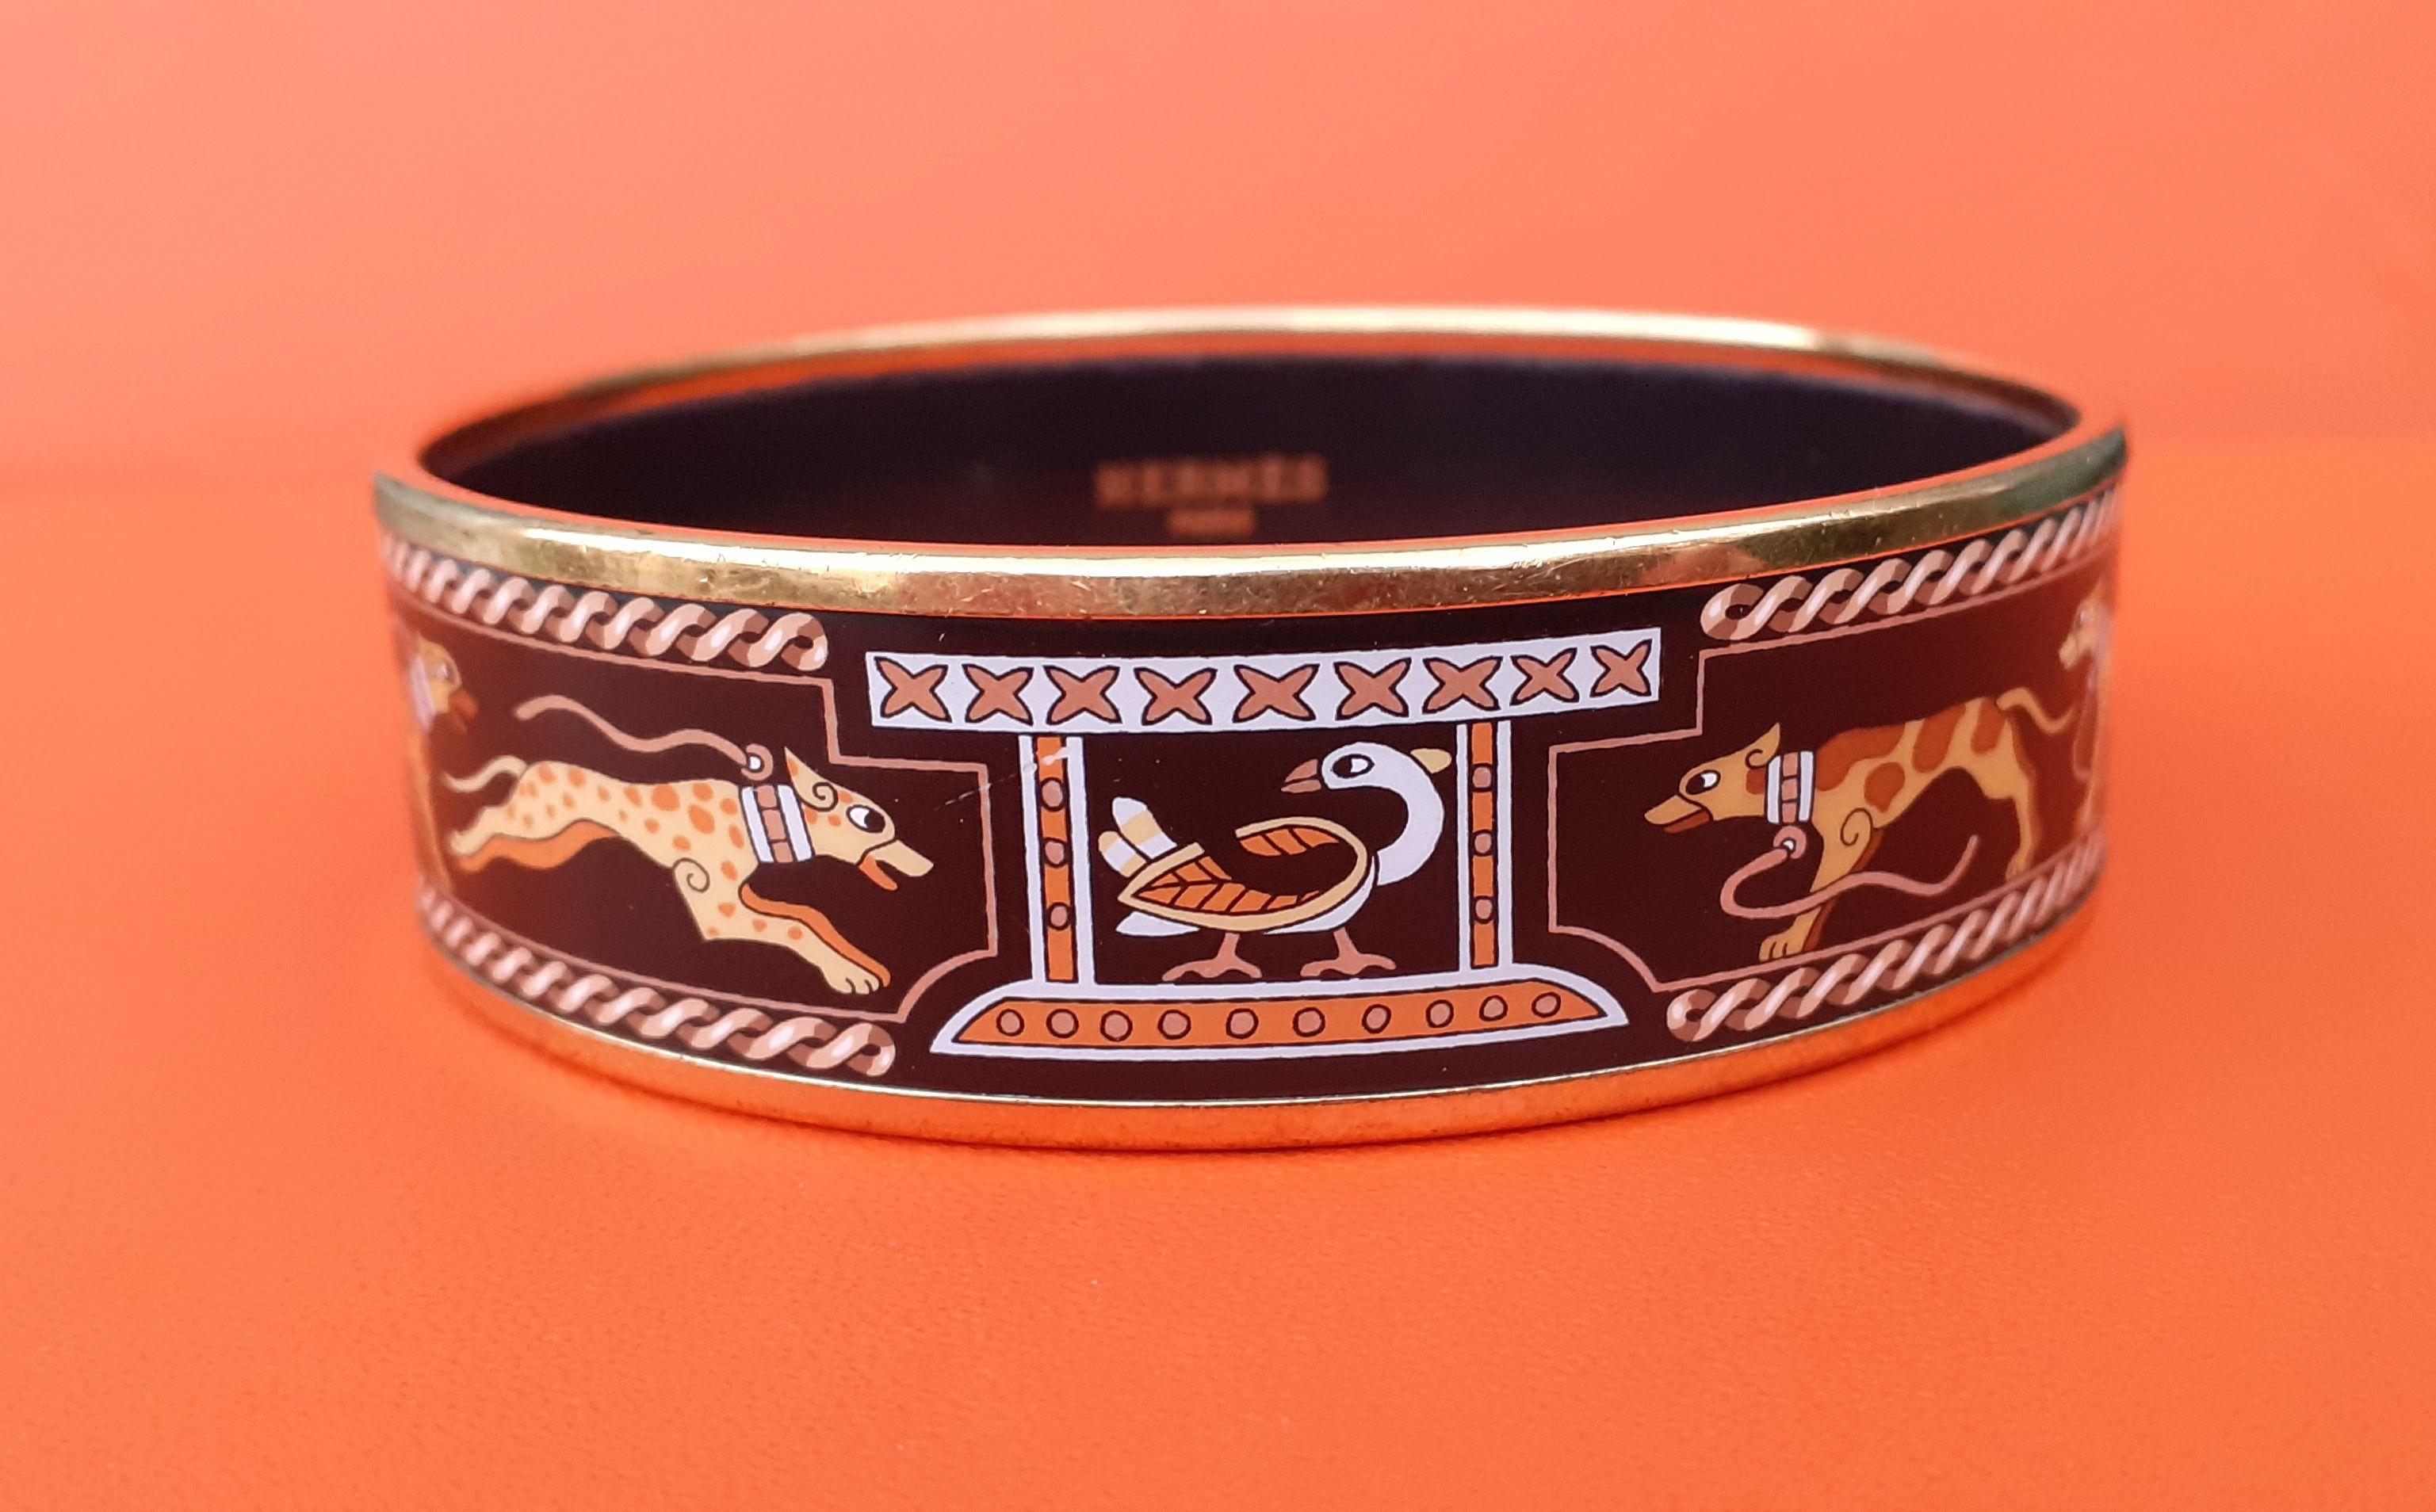 Beautiful Authentic Hermès Bracelet

Print: Lévriers (Greyhound dogs)

Hard to find 

Made in Austria + A (1997)

Made of printed enamel and gold plated hardware

Colorways: Black, Yellow, Brown, Orange

The collars, leashes and the interlacing